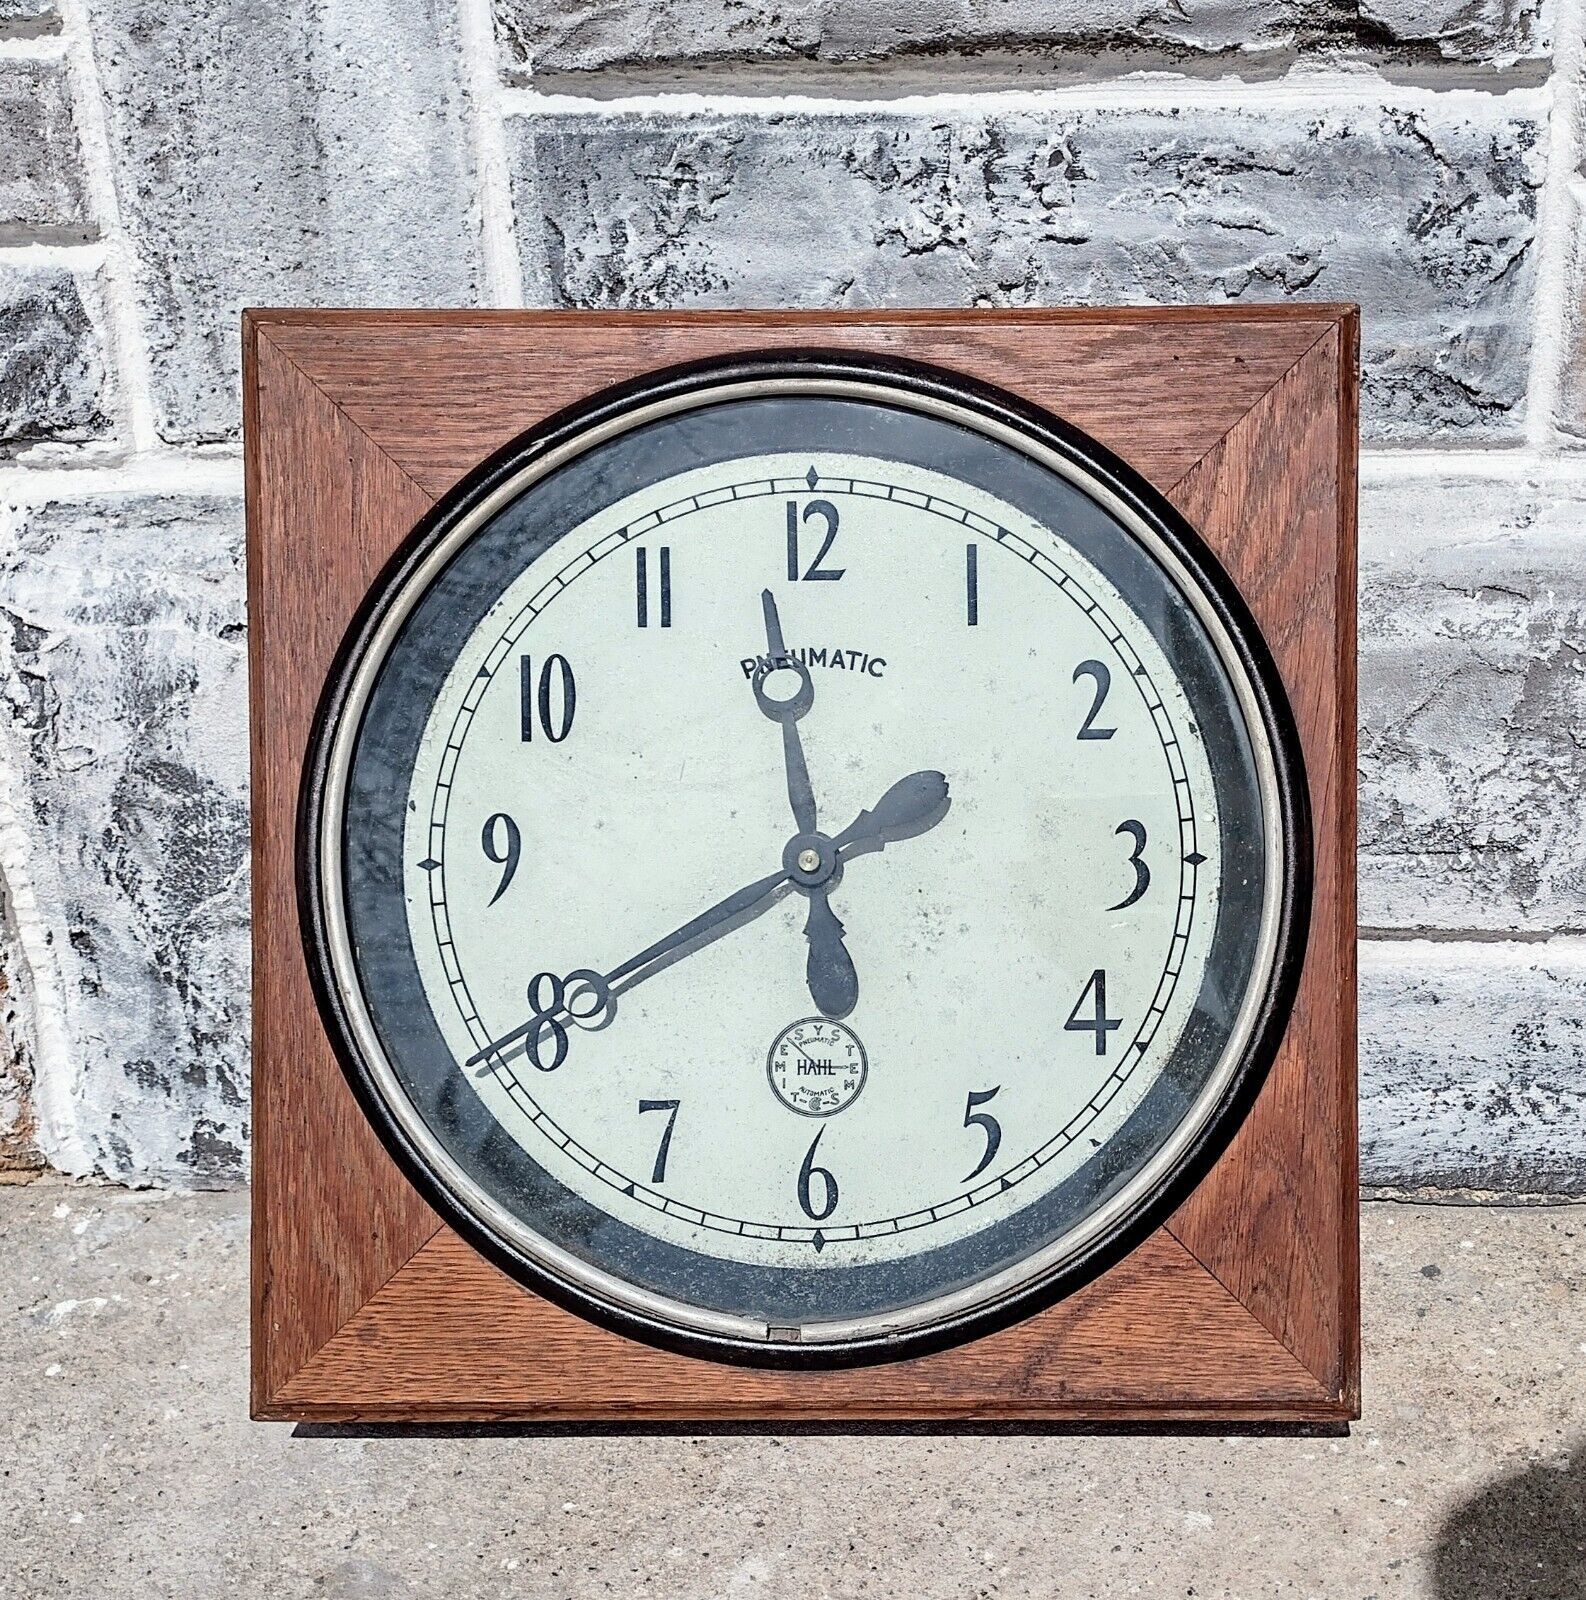 Antique Hahl Pneumatic Automatic Time Systems Wall Slave Clock in Oak Case